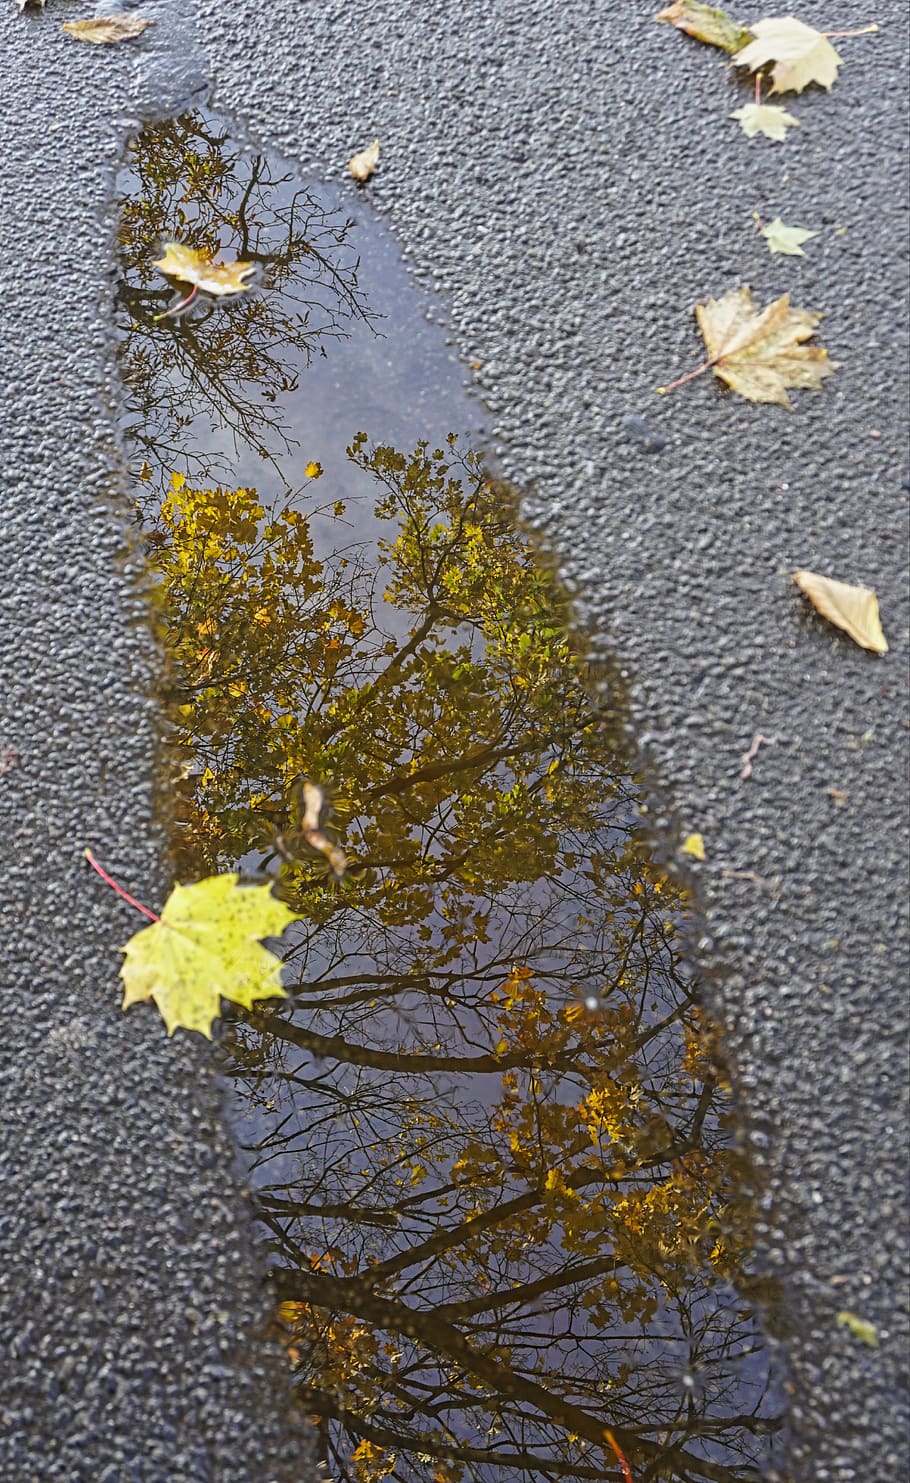 puddle, rain, wet, mirroring, autumn, leaves, november day, colorful leaves, reflect, concrete